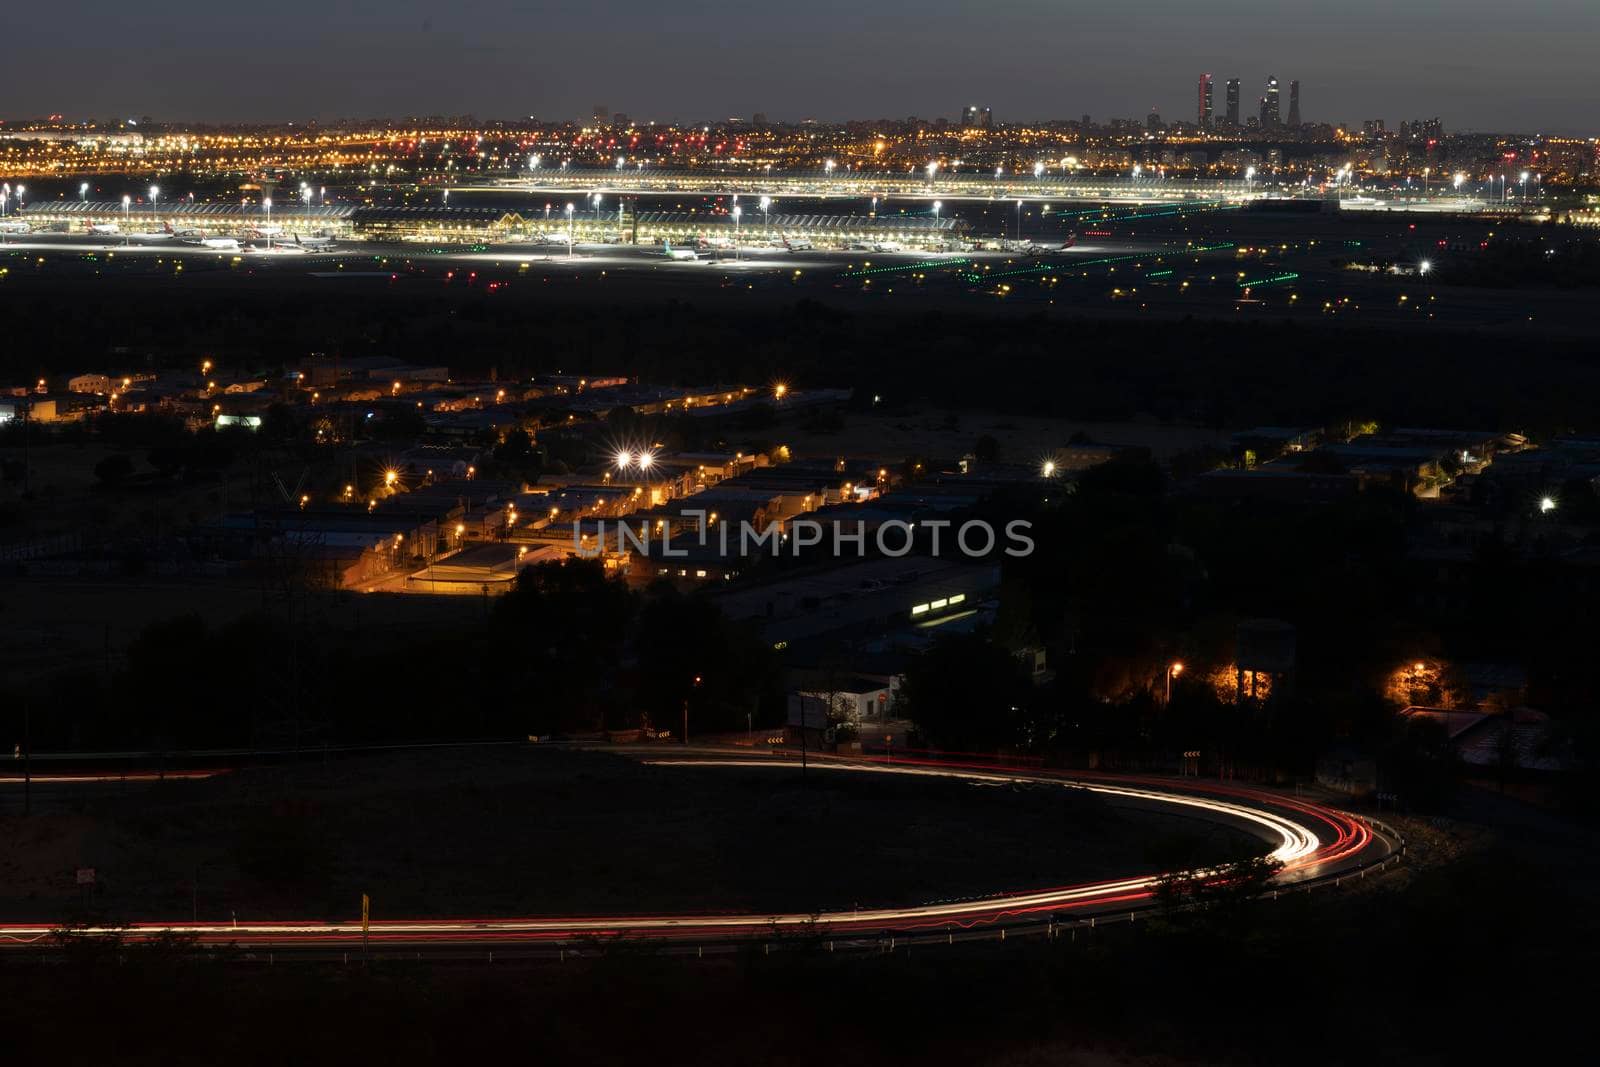 Madrid skyline at night with barajas airport and 4 towers in the background. Slow shutter of traffic. Shot from Paracuellos de Jarama.